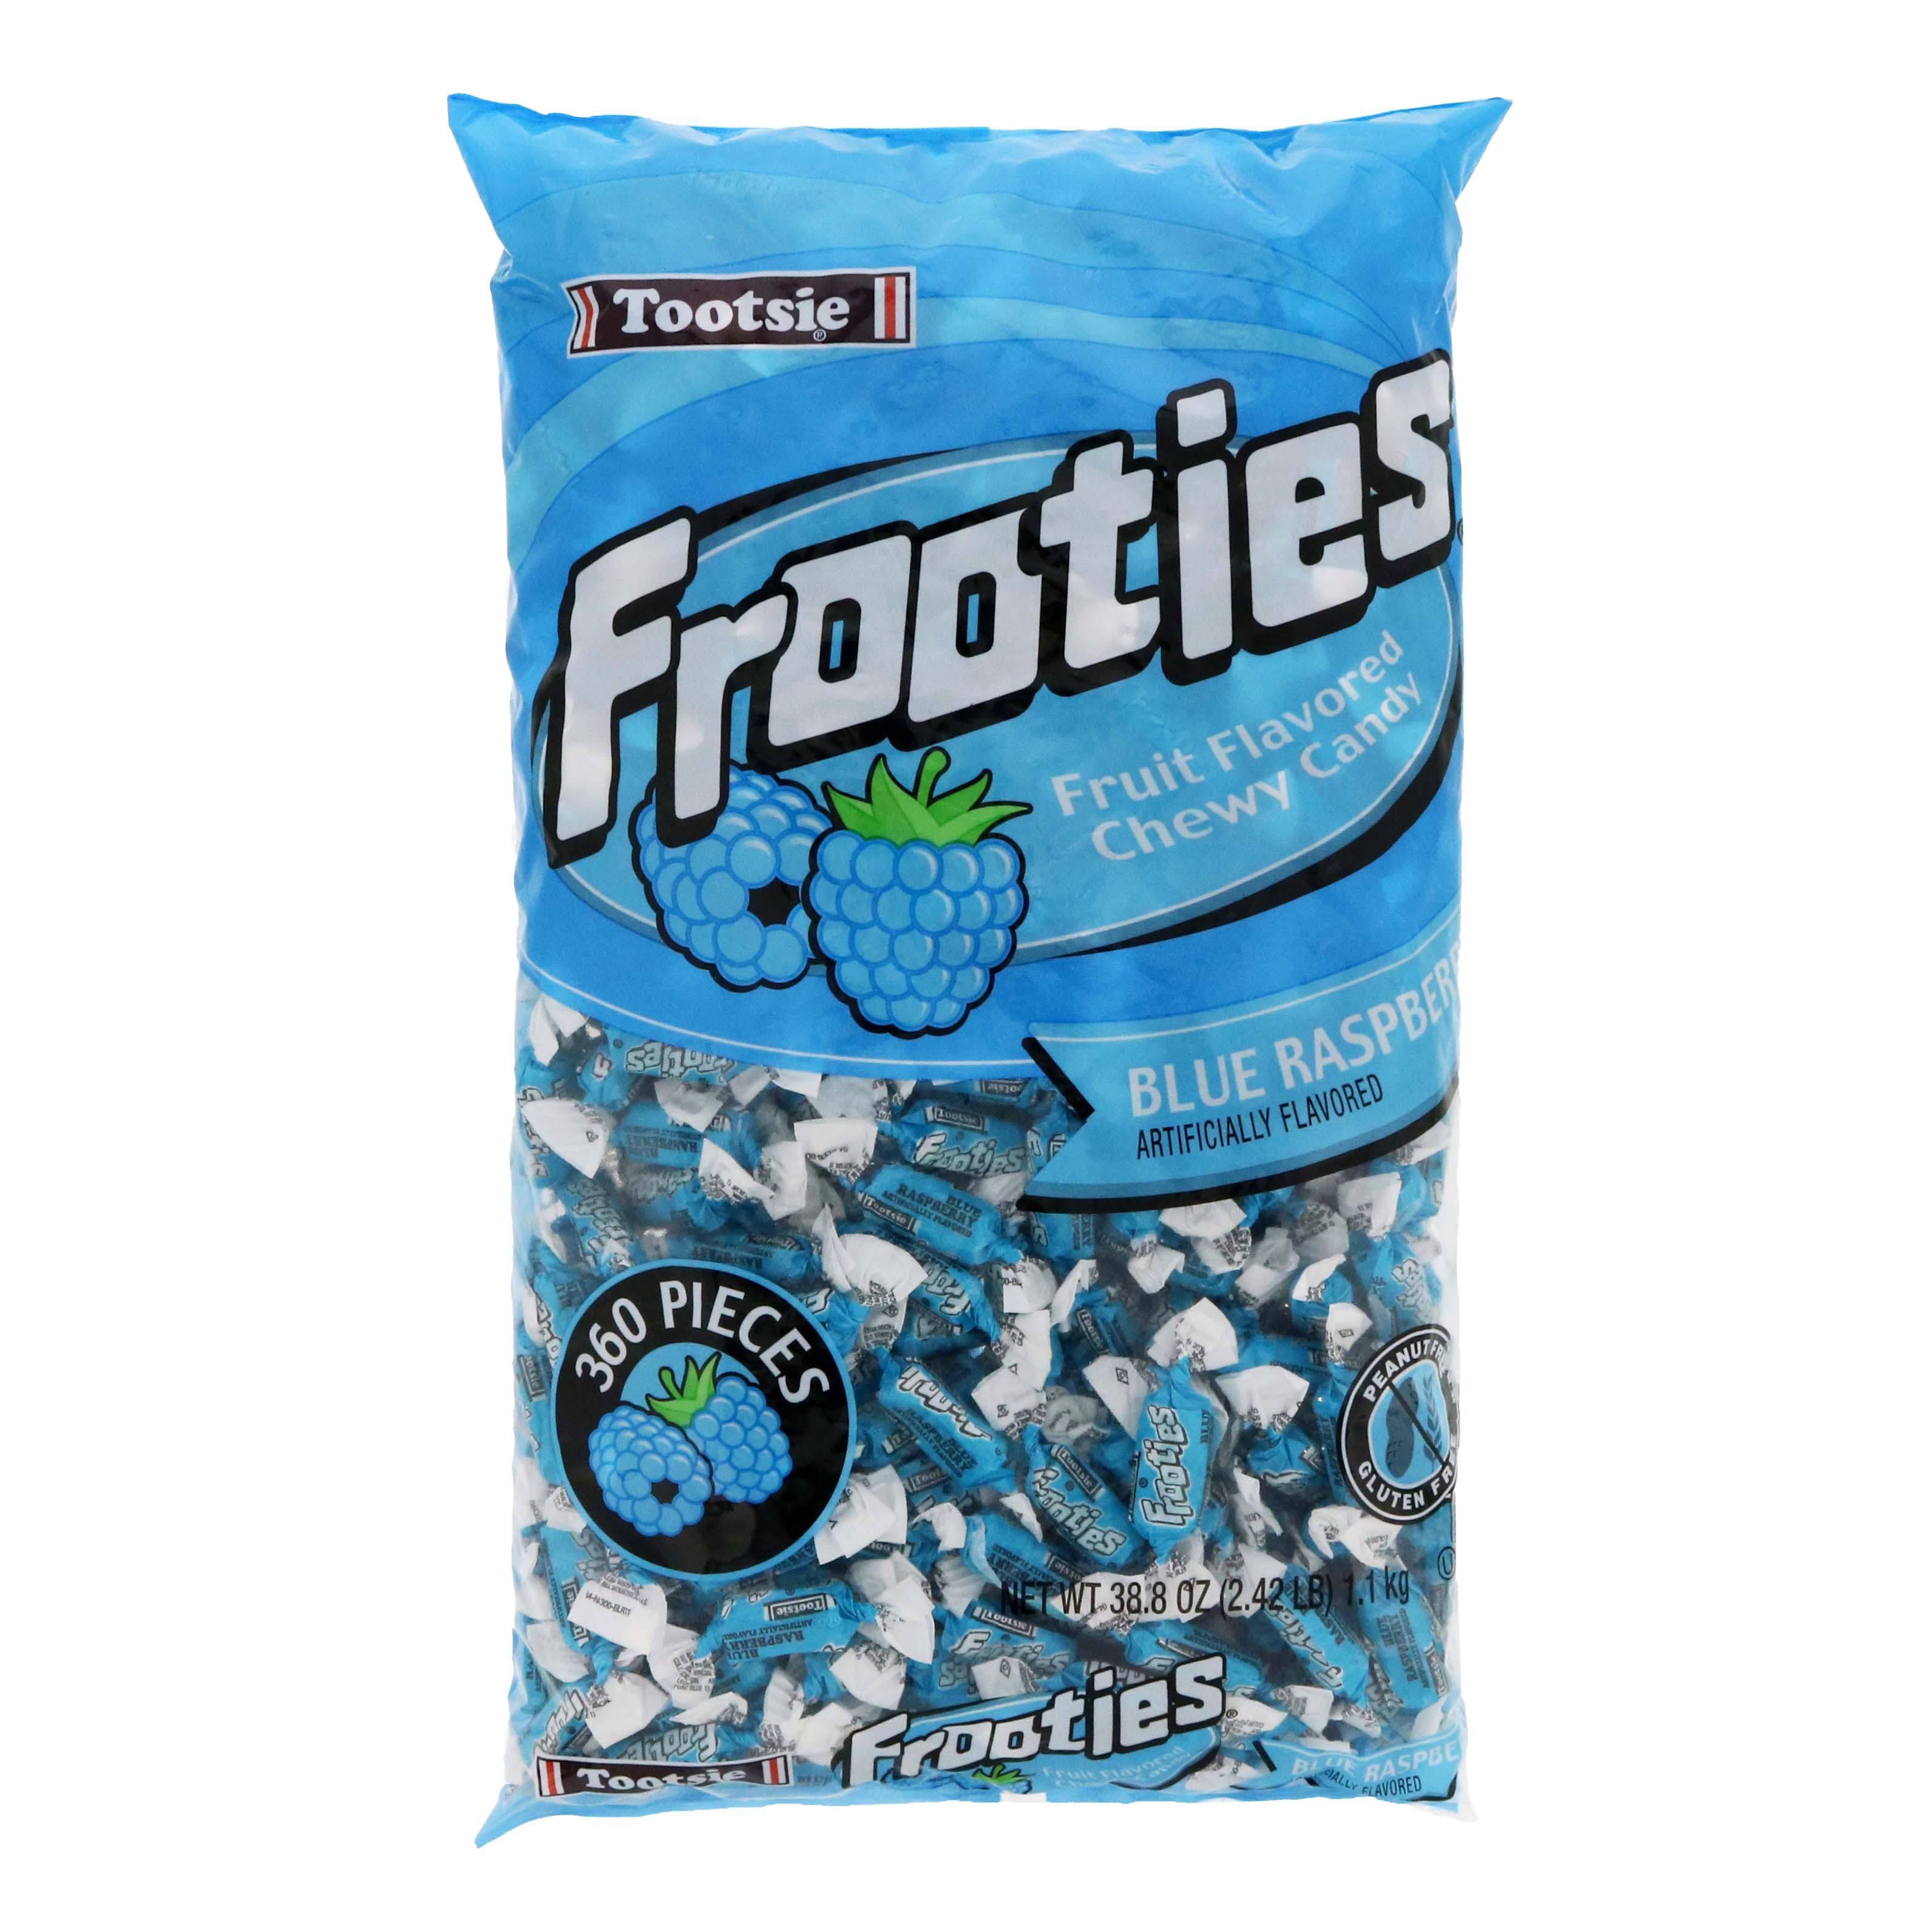 Tootsie Frooties Blue Raspberry Chewy Candy - 360ct, 38.8oz